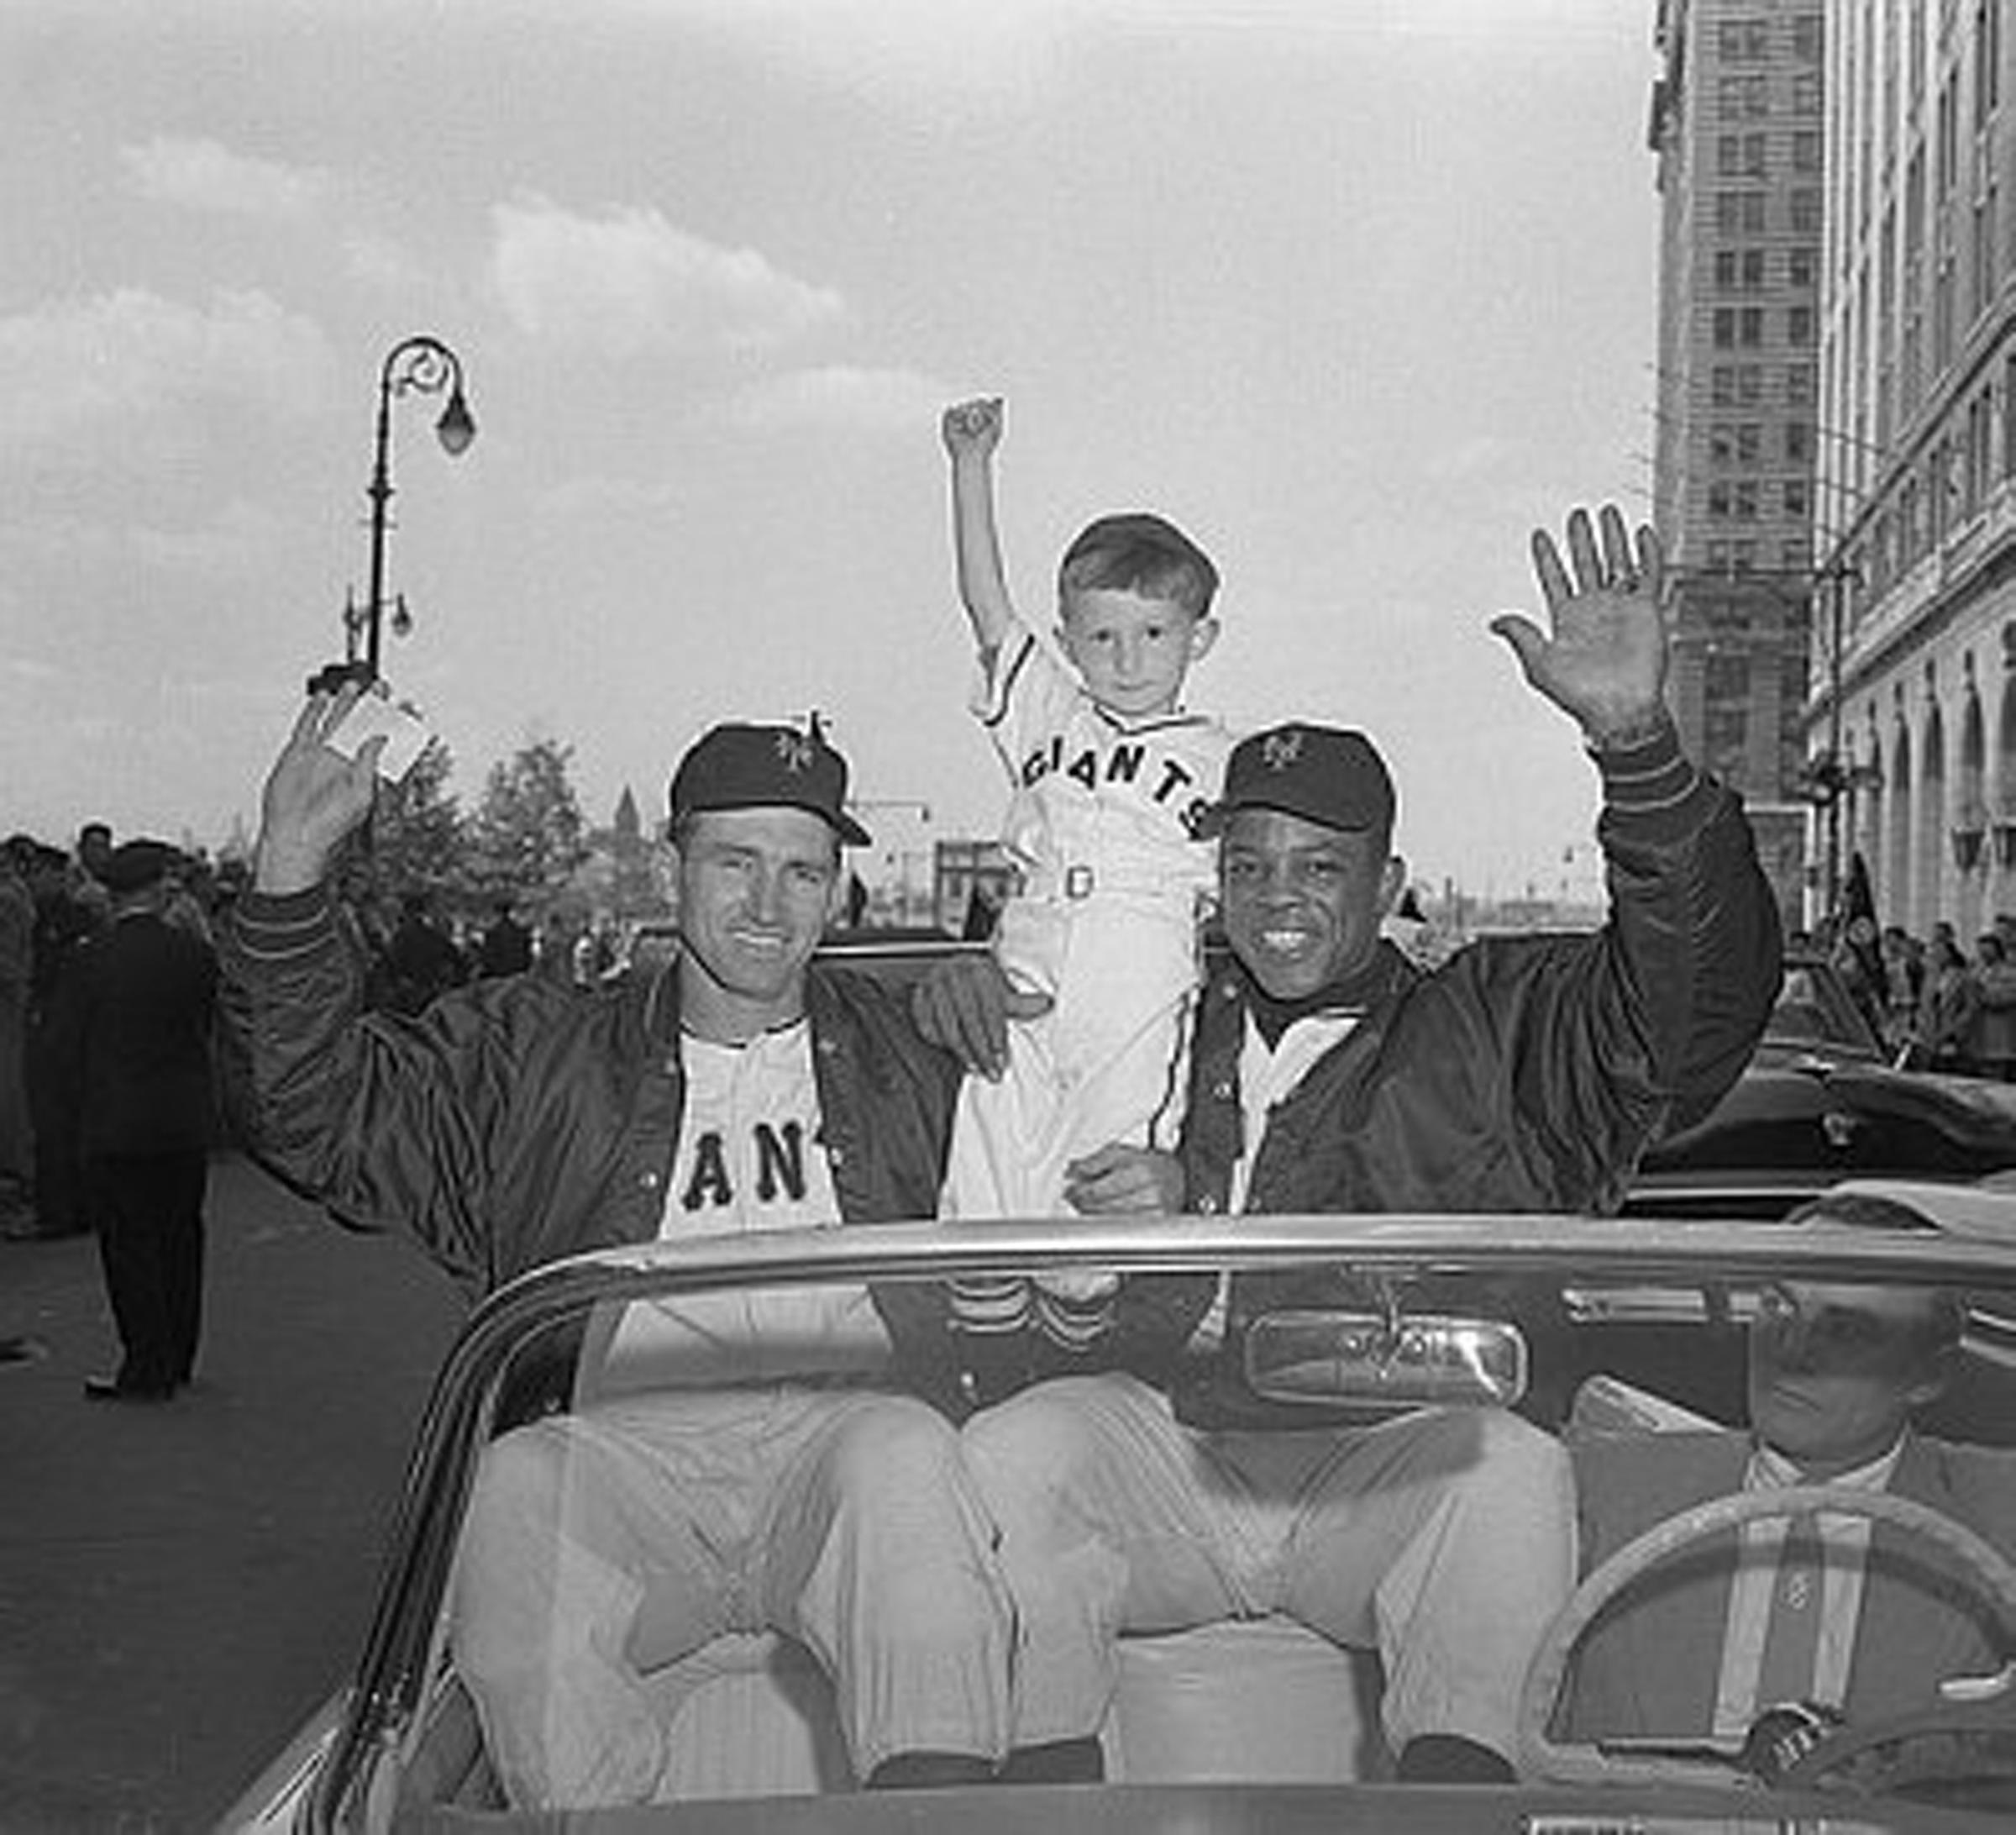 Four year old Kevin Currey made an appearance at today's parade for the N.L. Champions, all decked out in a Giant uniform cut to size. He caught the eye of Alvin Dark and Willie Mays and they scooped him up into their car during the big parade. A big day, indeed for Kevin and the champs. September 1954